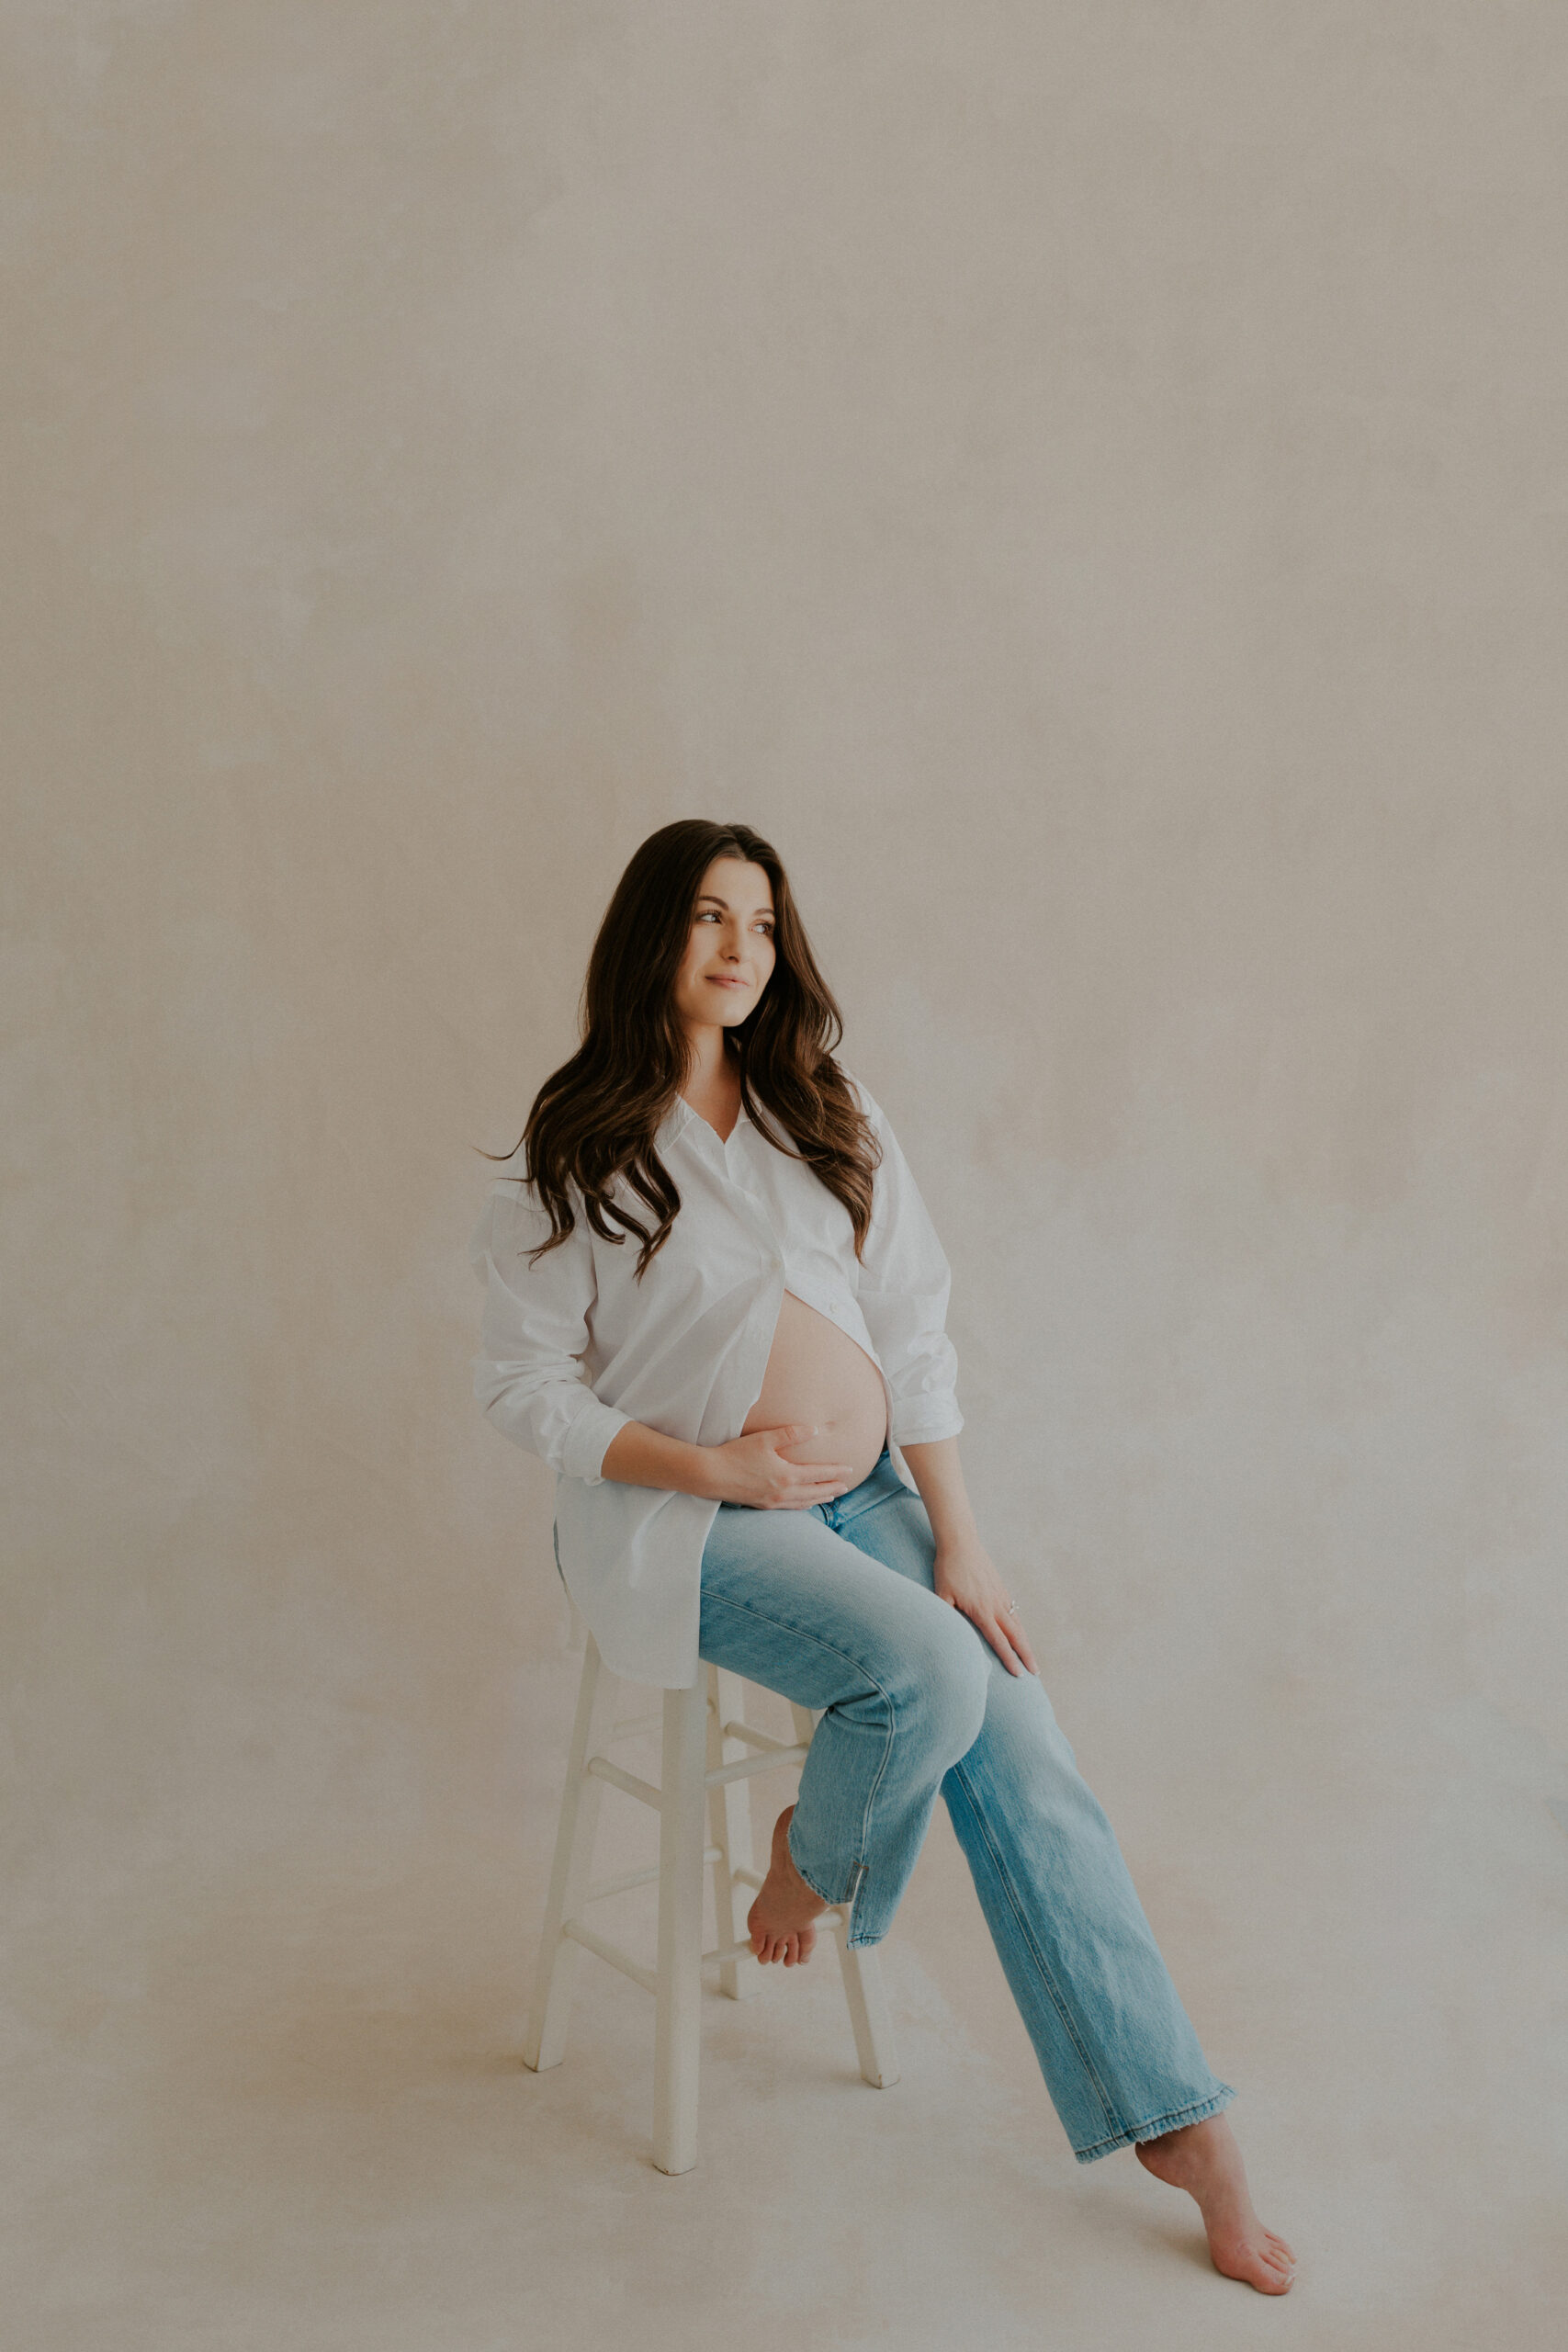 Timeless and romantic studio maternity session in Denver, Colorado for first time mom